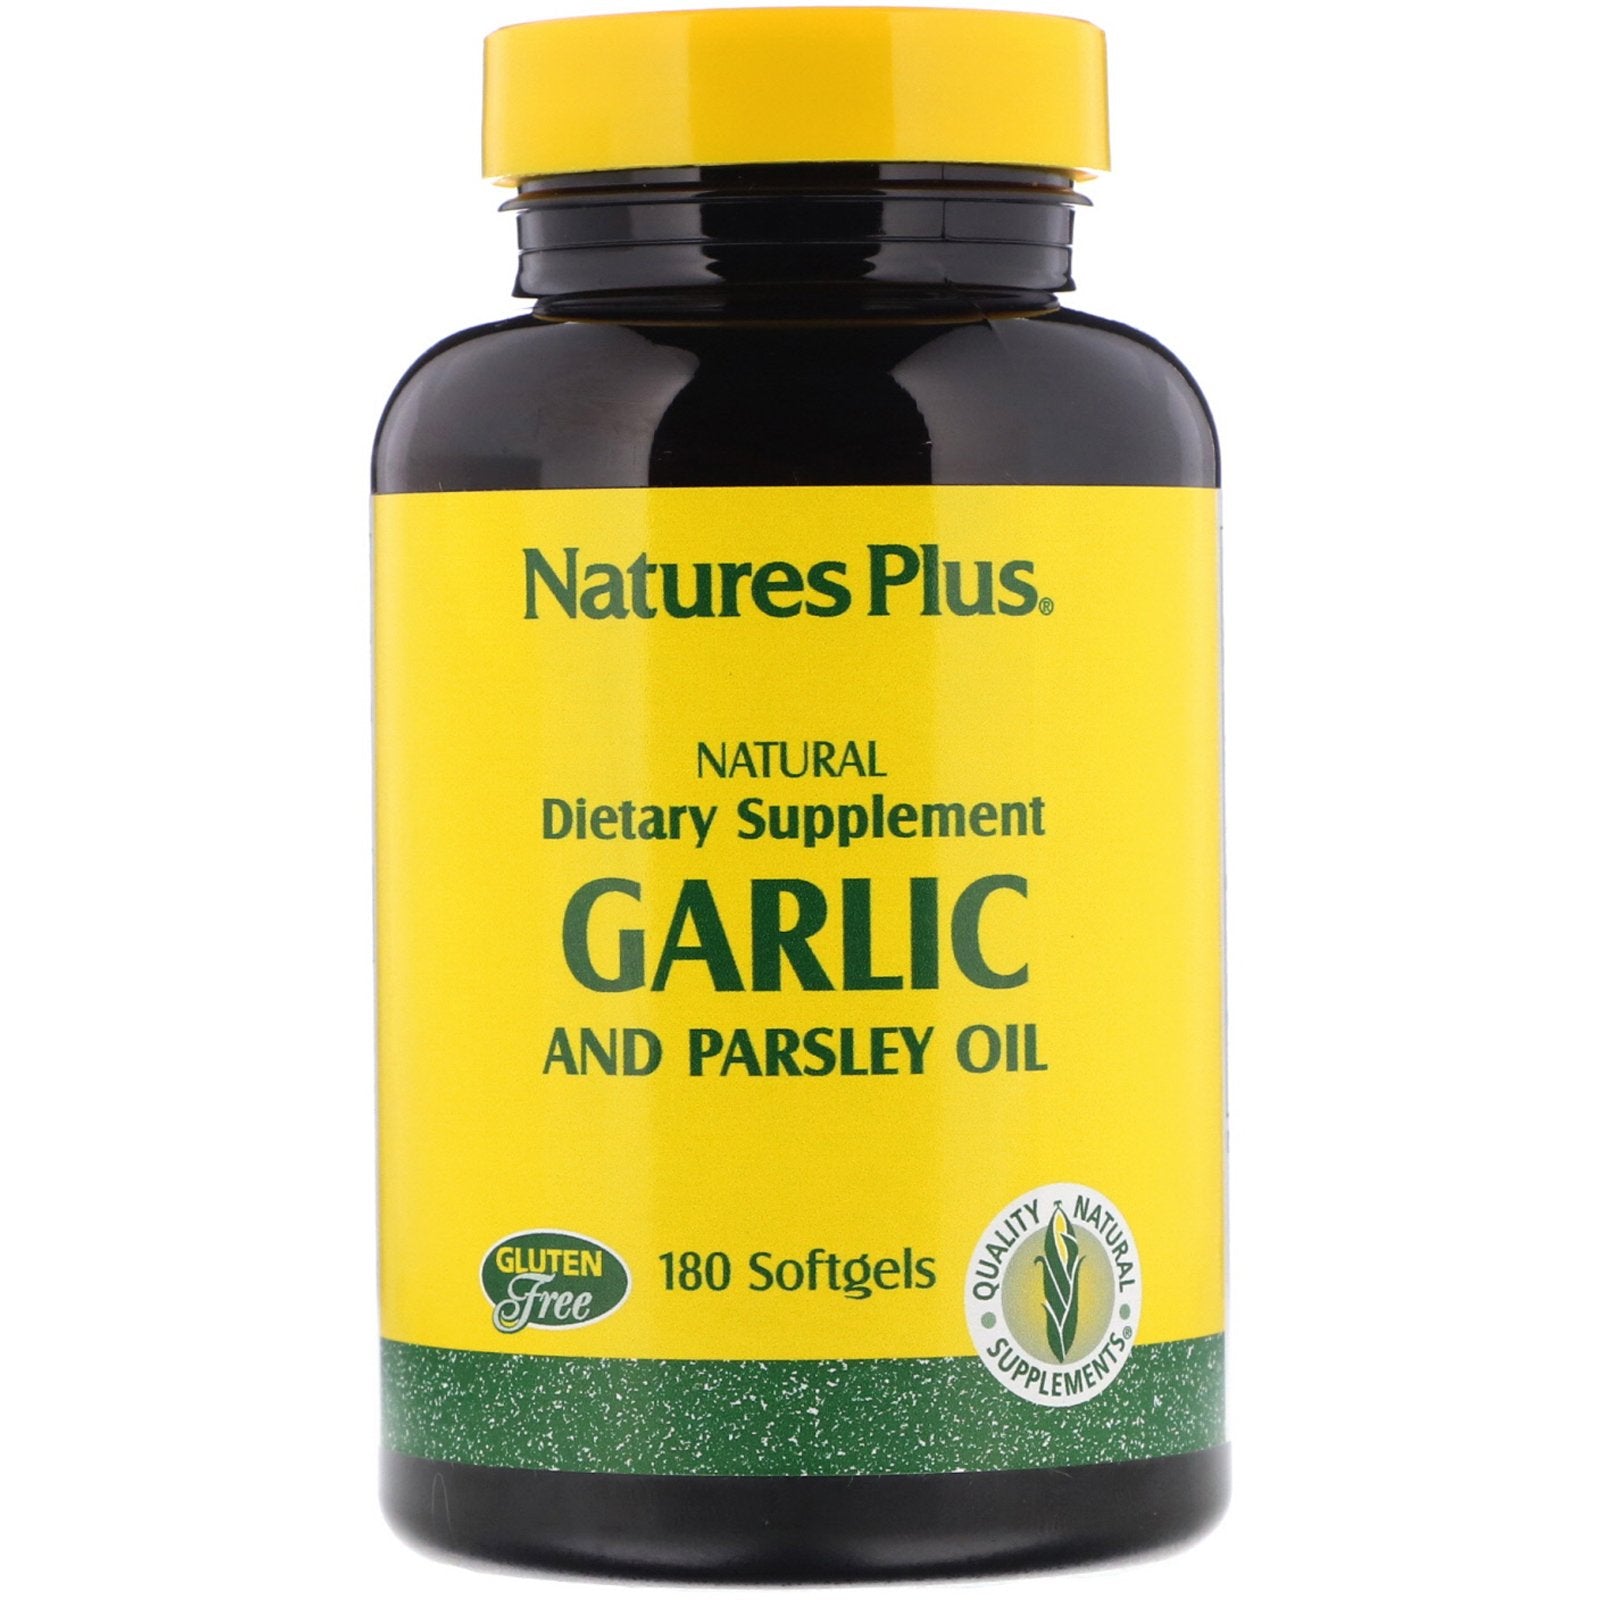 Nature's Plus, Garlic and Parsley Oil, 180 Softgels